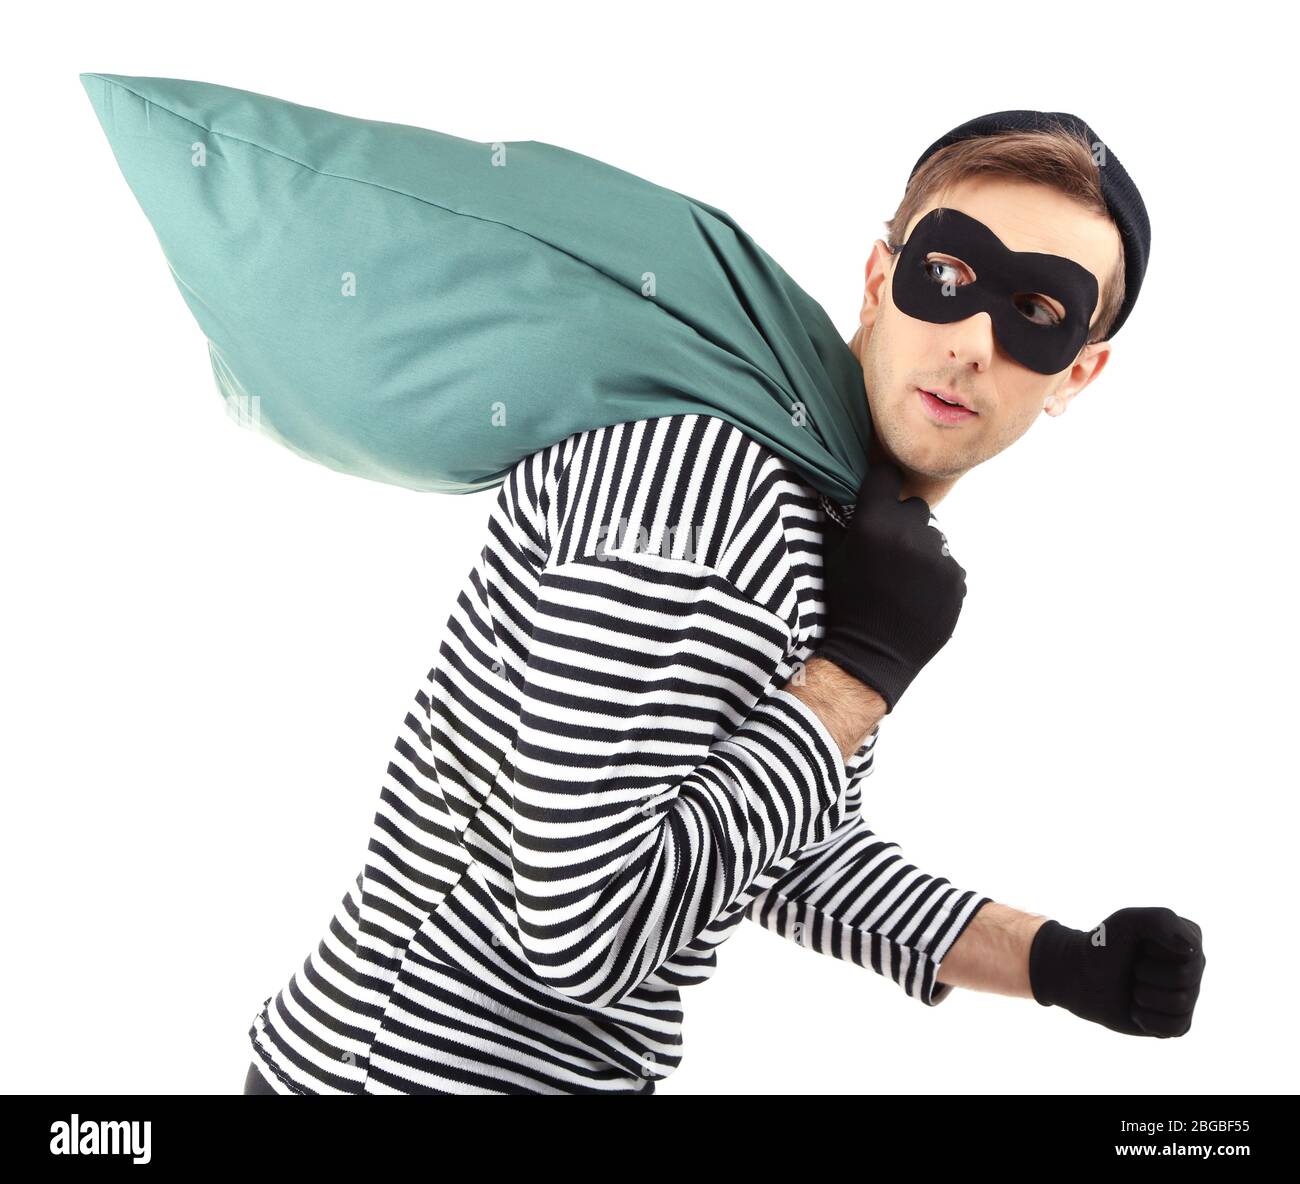 thief-with-bag-isolated-on-white-2BGBF55.jpg